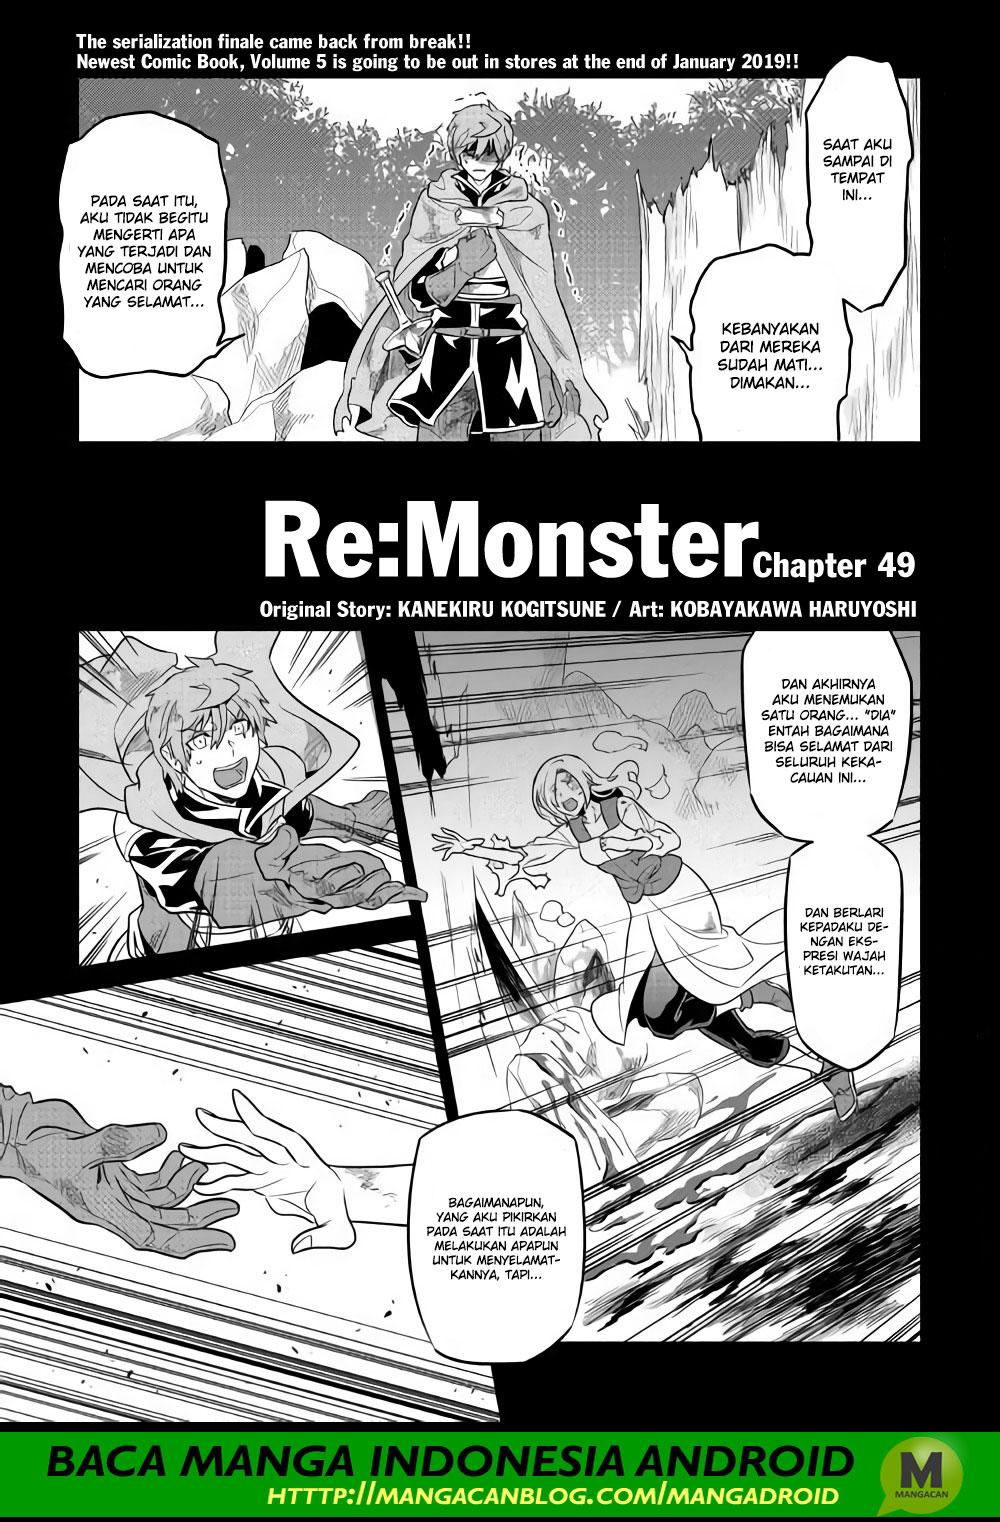 Re:Monster: Chapter 49 - Page 1